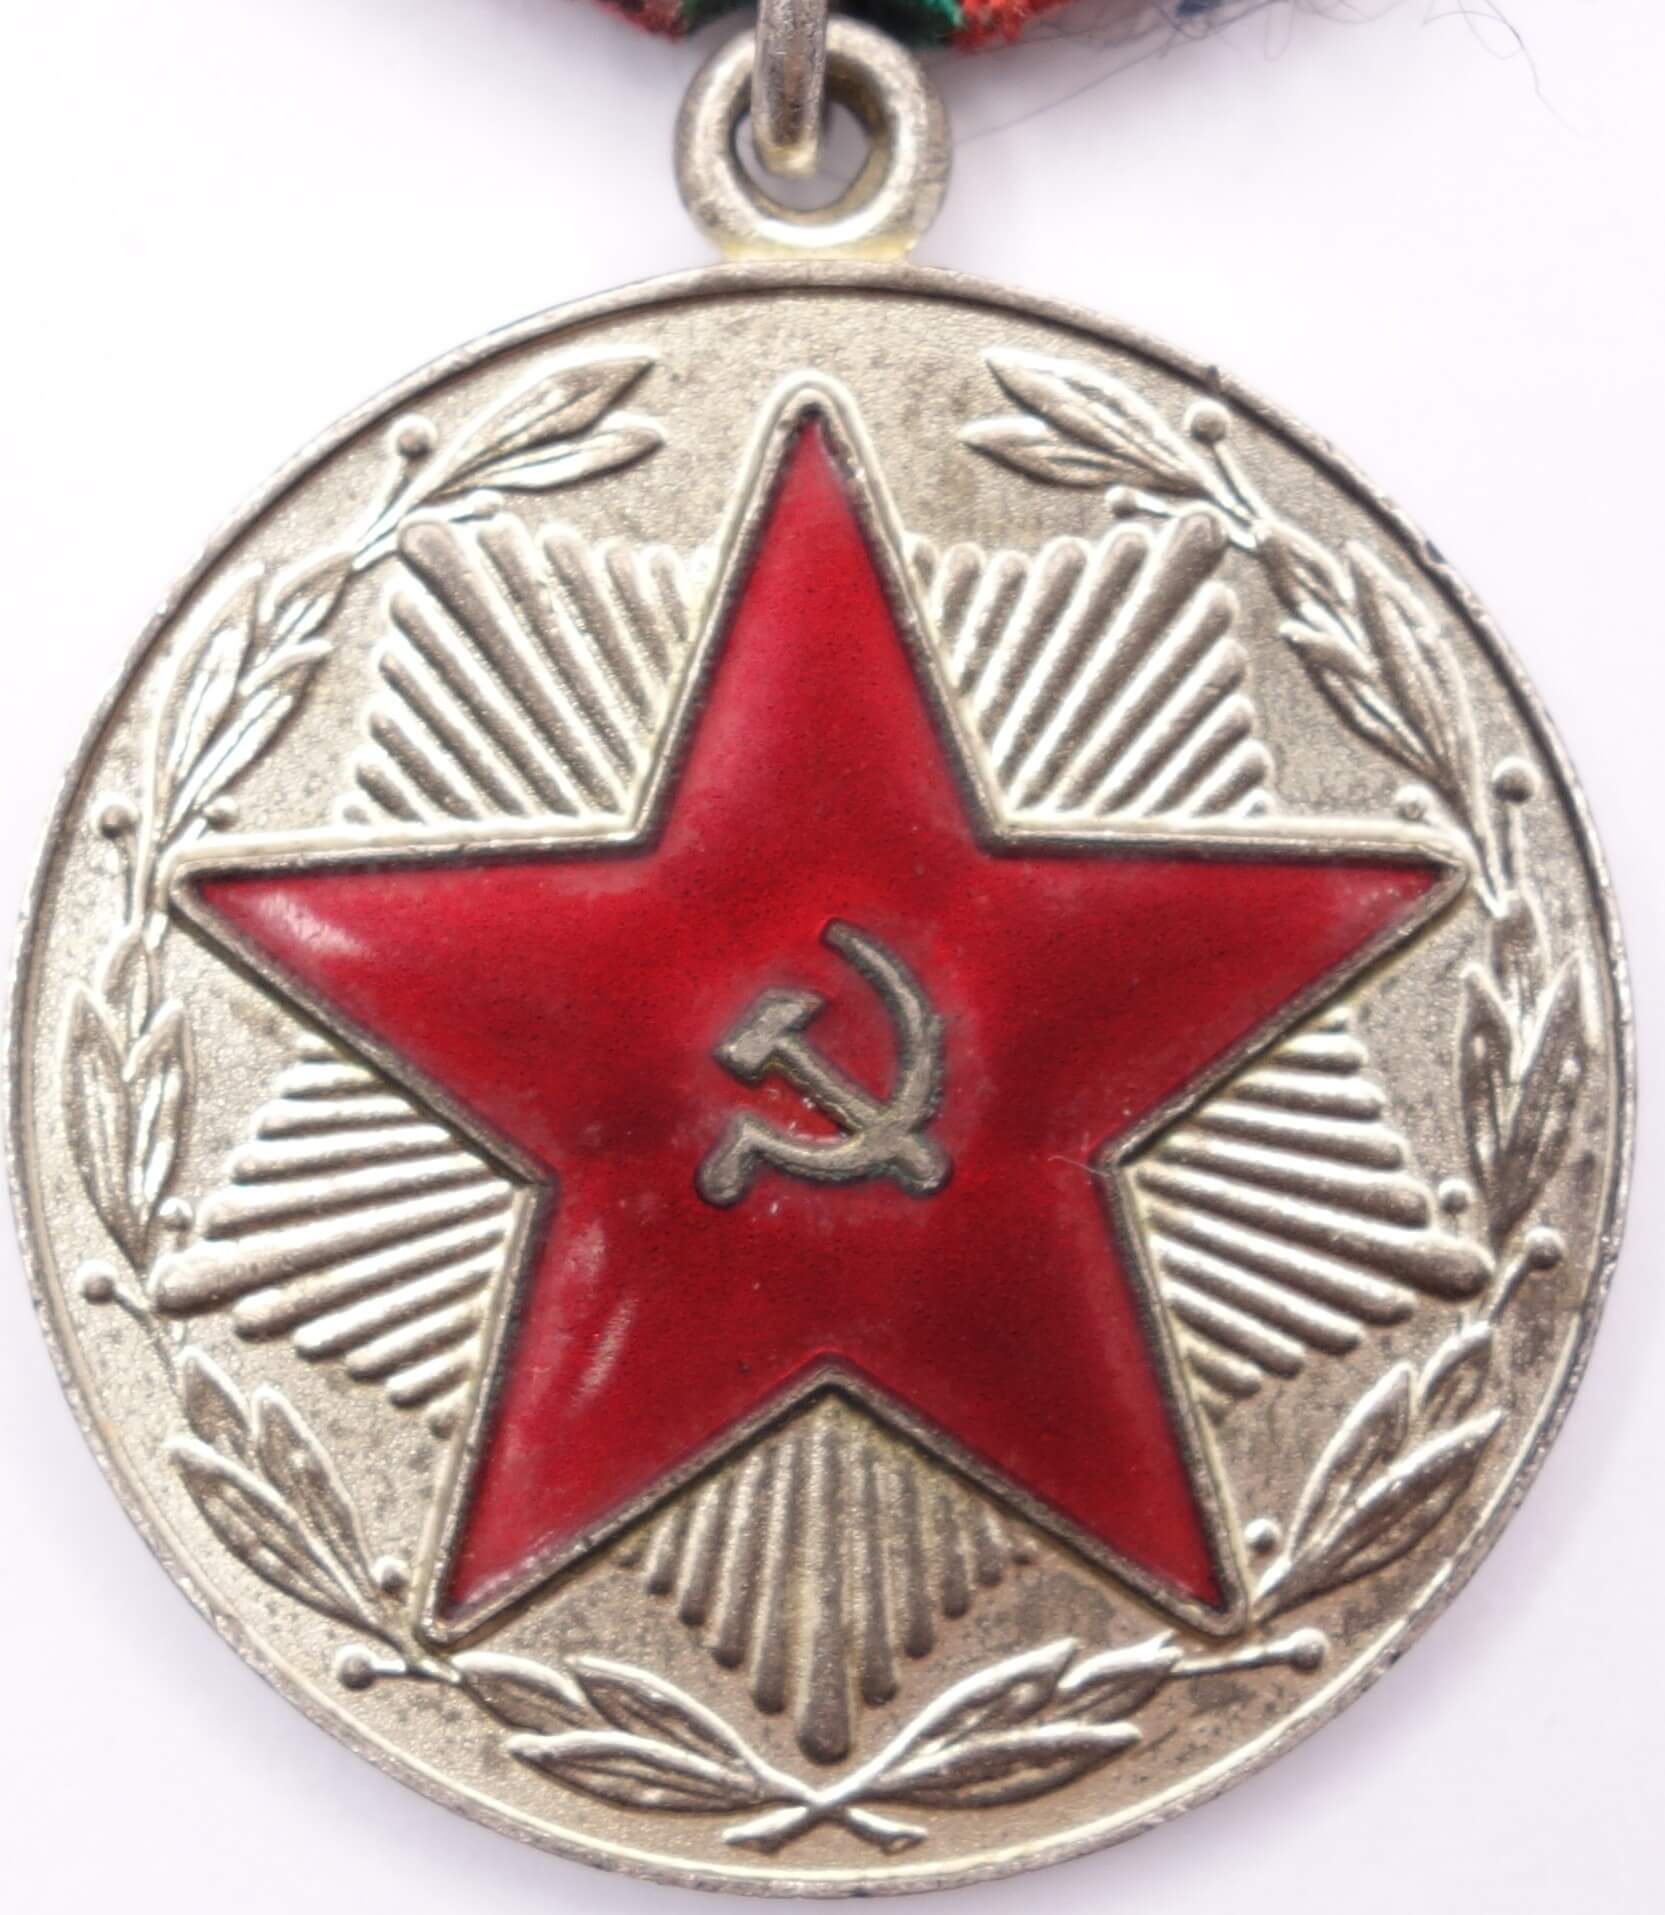 Soviet Medal for Impeccable Service 1st class in near mint condition